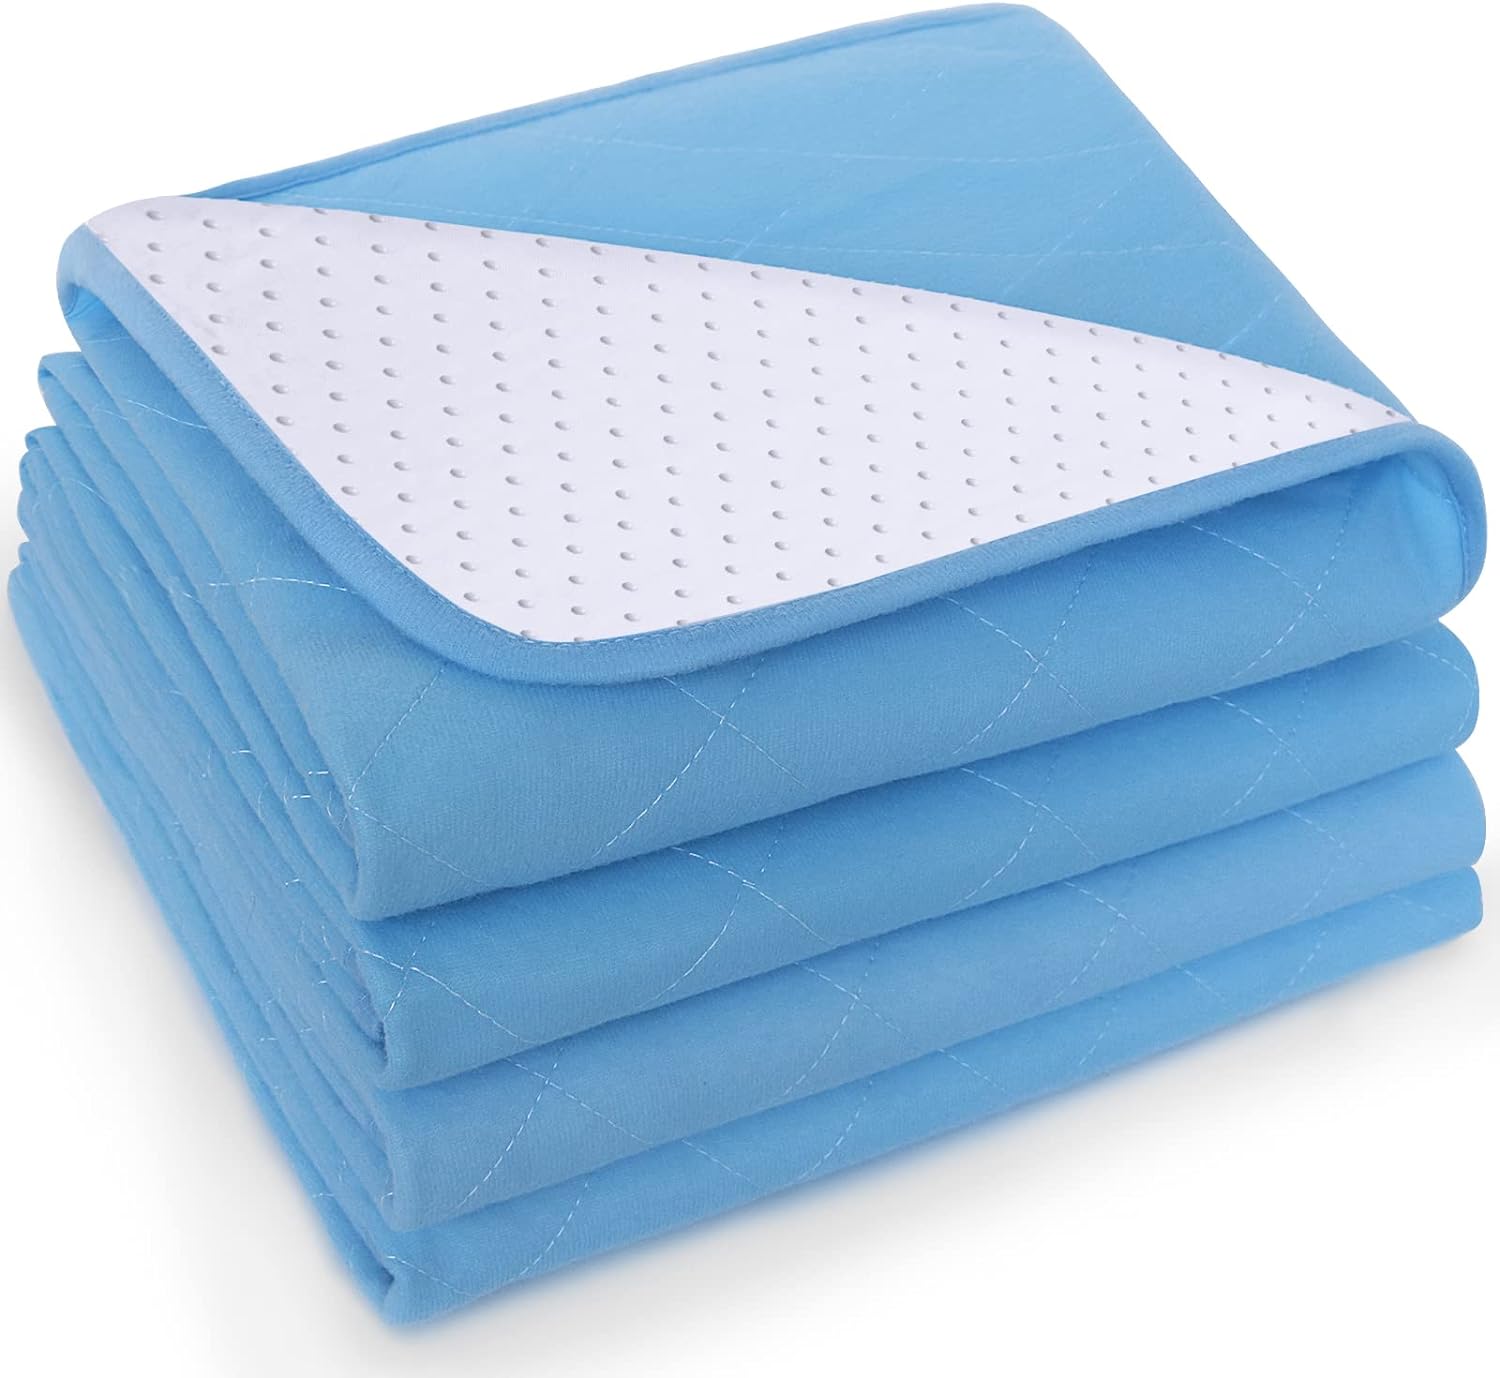 Waterproof Bed Pad/ Mat - 34" x 52", 4 Pack, Reusable Chuck Pads, Incontinence Underpads, Sheet Protector with Non-slip Back for Adults, Elderly, Kids and Pets, Machine Washable, Blue - Biloban Onelin Store